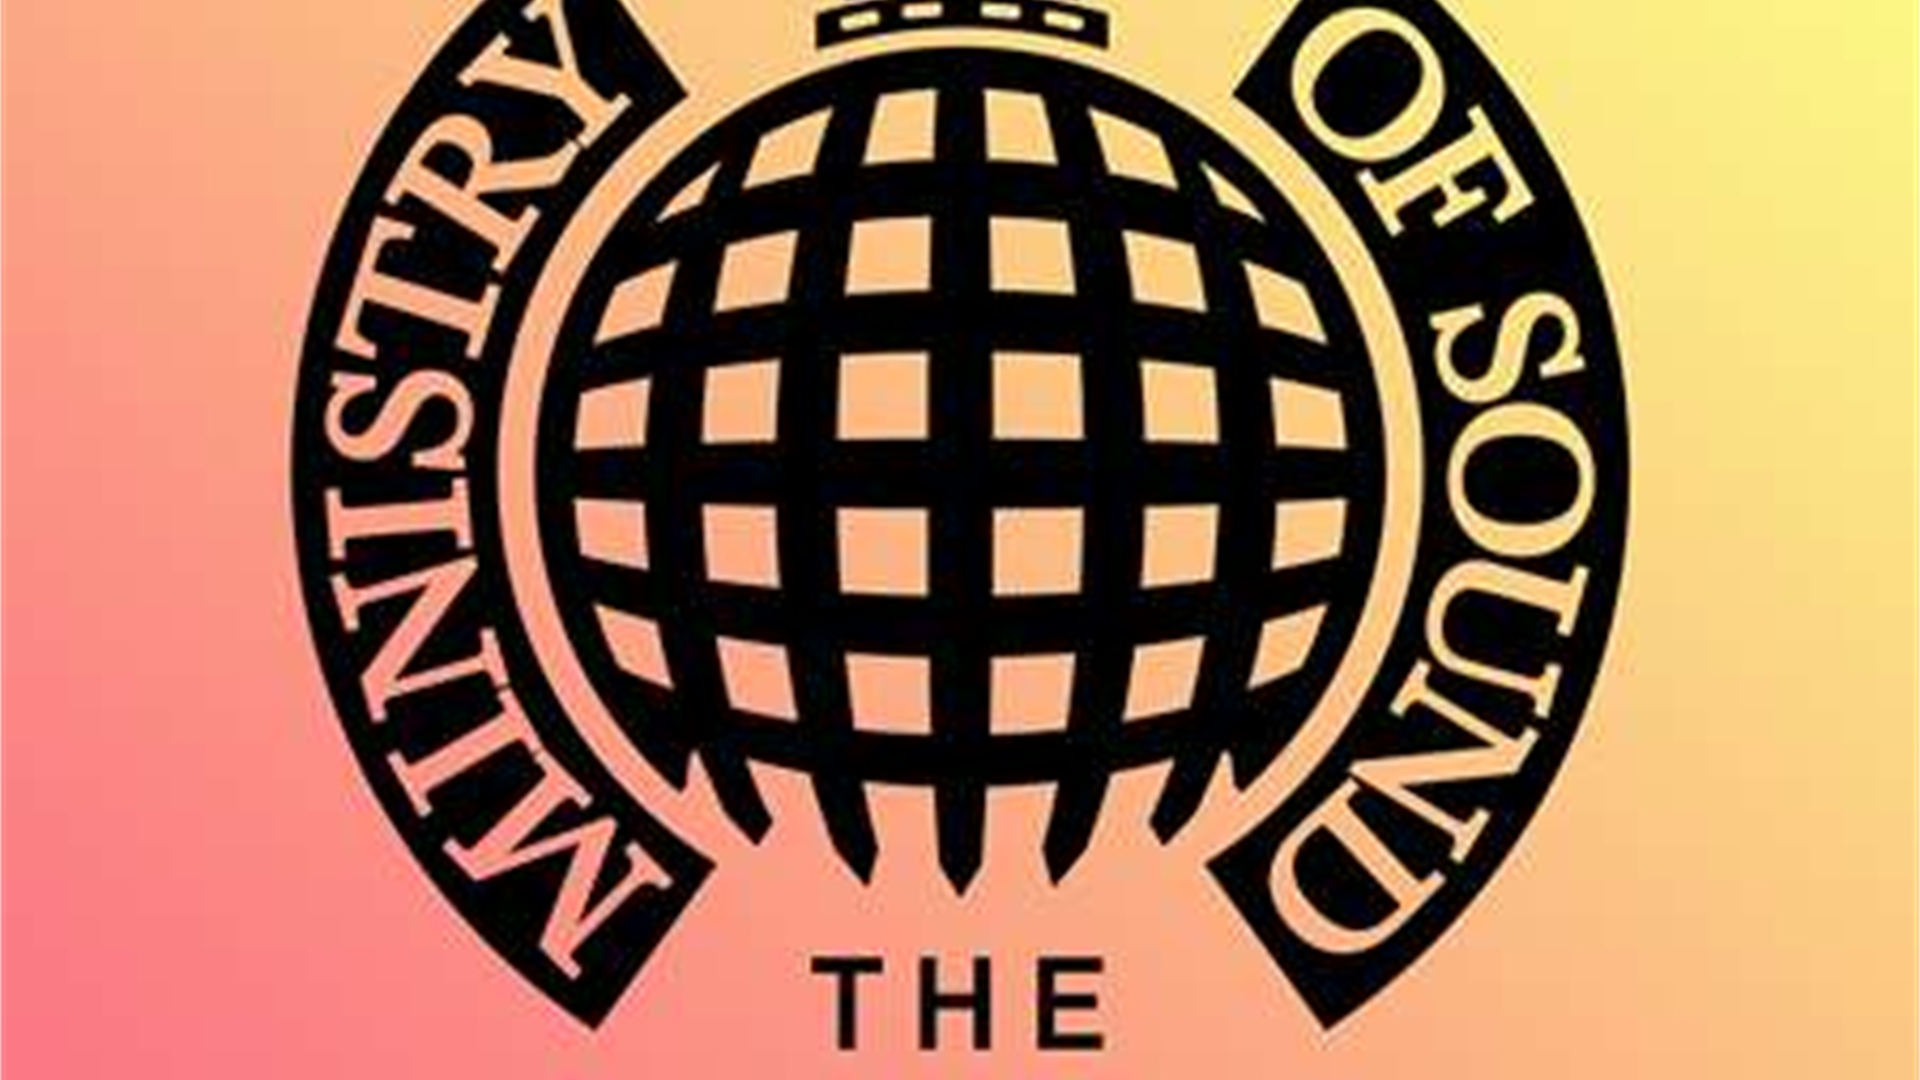 Ministry of sound the annual 2020